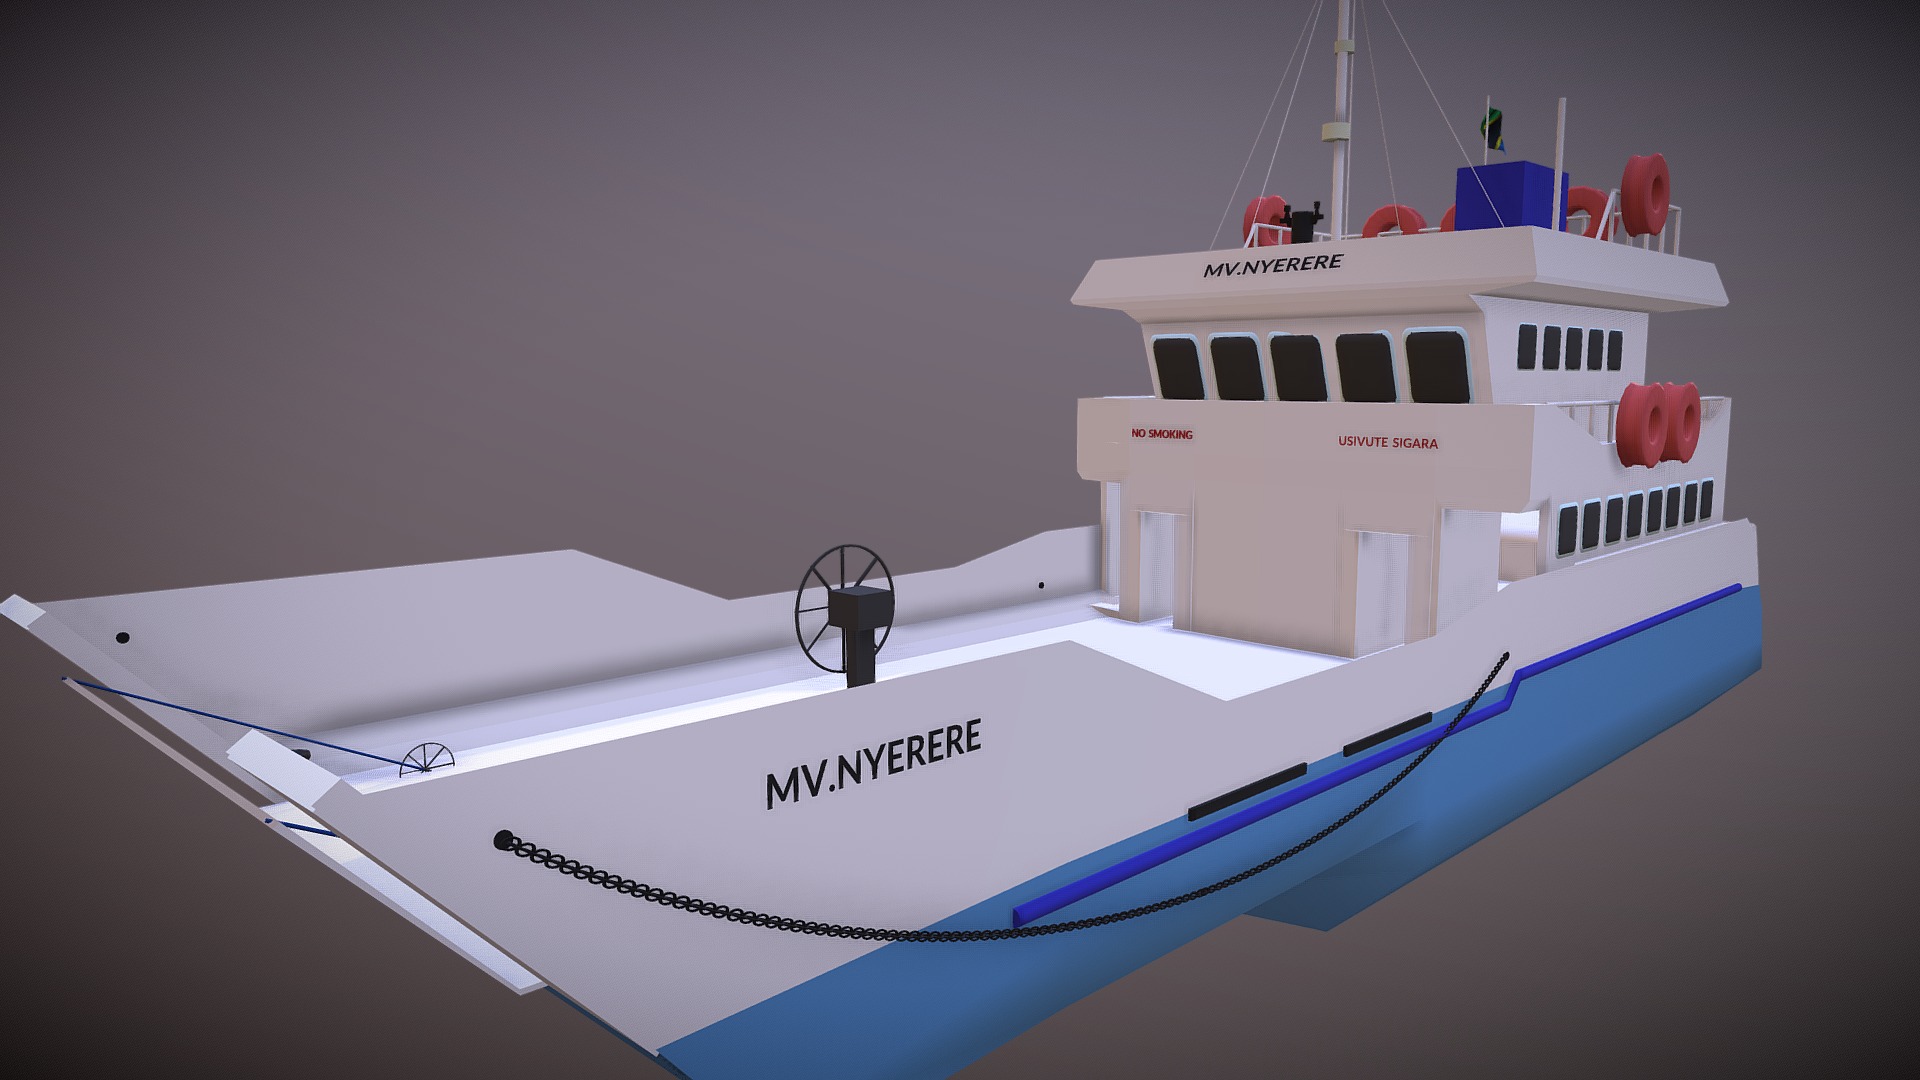 3D model MV Nyerere – Tanzania Ferry - This is a 3D model of the MV Nyerere - Tanzania Ferry. The 3D model is about diagram.